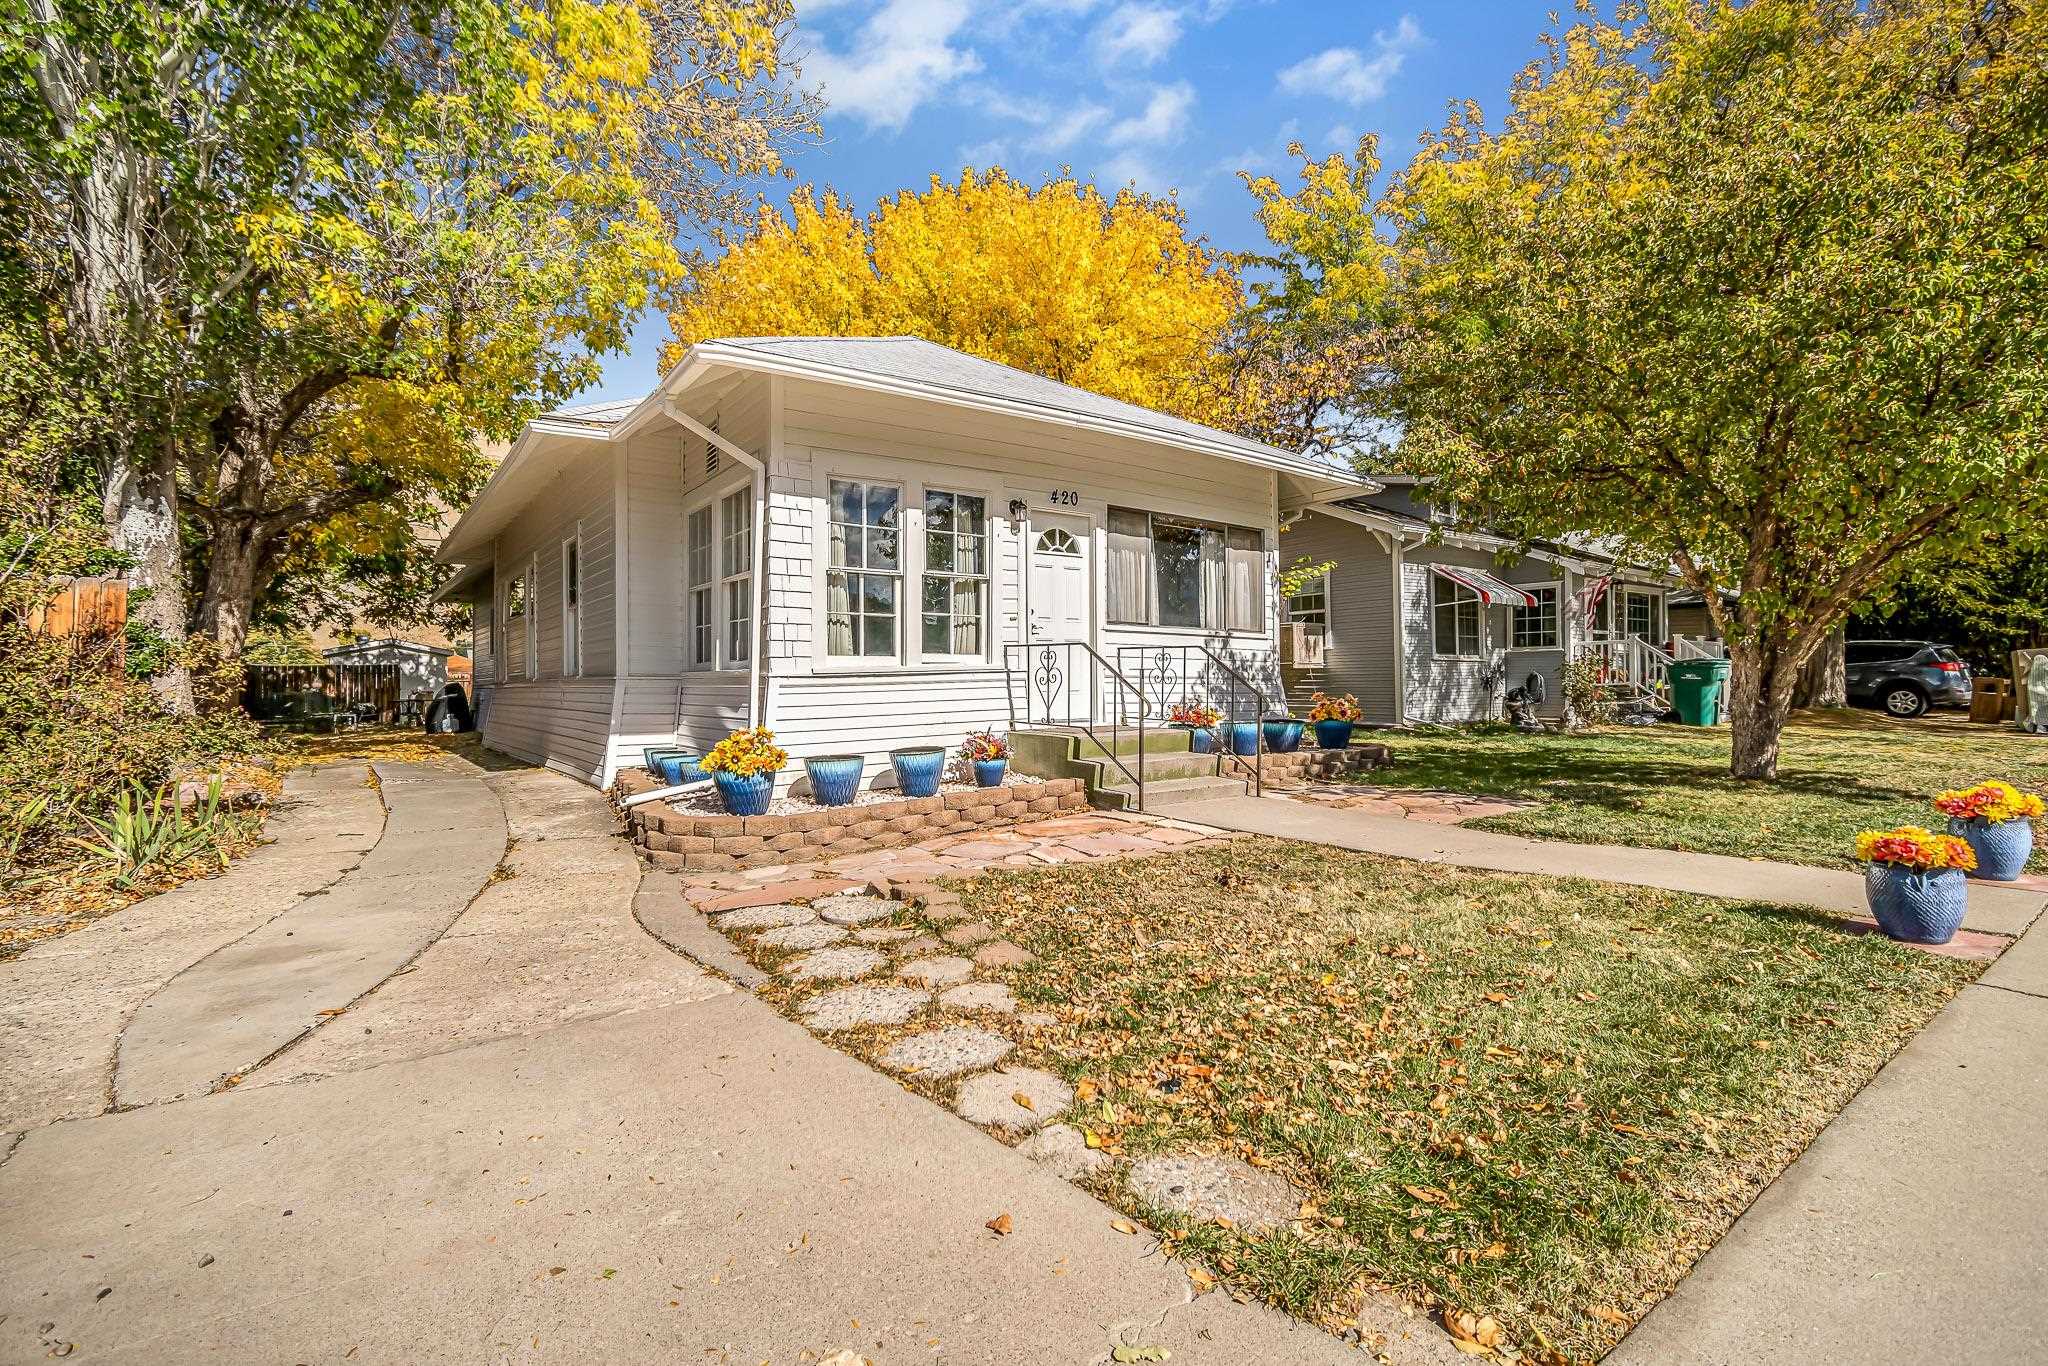 This charming downtown bungalow is located in the heart of Palisade, just steps from downtown shops, restaurants, its award winning farmer's market, wineries, breweries, and Peachbowl Park. The home retains its original charm from the moment you step into the cozy, bright sitting area, accompanied by 3 bedrooms, 1 bathroom, and a large storage space downstairs. It still has plenty of room to add your own mark with updates, but sellers have maintained the home well over the last several years with a freshly painted exterior, updated electrical, plumbing, insulation, newer laminate flooring, etc. Downstairs one will find ample storage space with built-in shelves and a workshop bench to utilize for projects. Additional storage can be utilized in the spacious 16' X 10' shed located in the quaint backyard that is accompanied by stunning views of the Bookcliffs. This location is prime for a primary residence, Airbnb, investment, or secondary property.